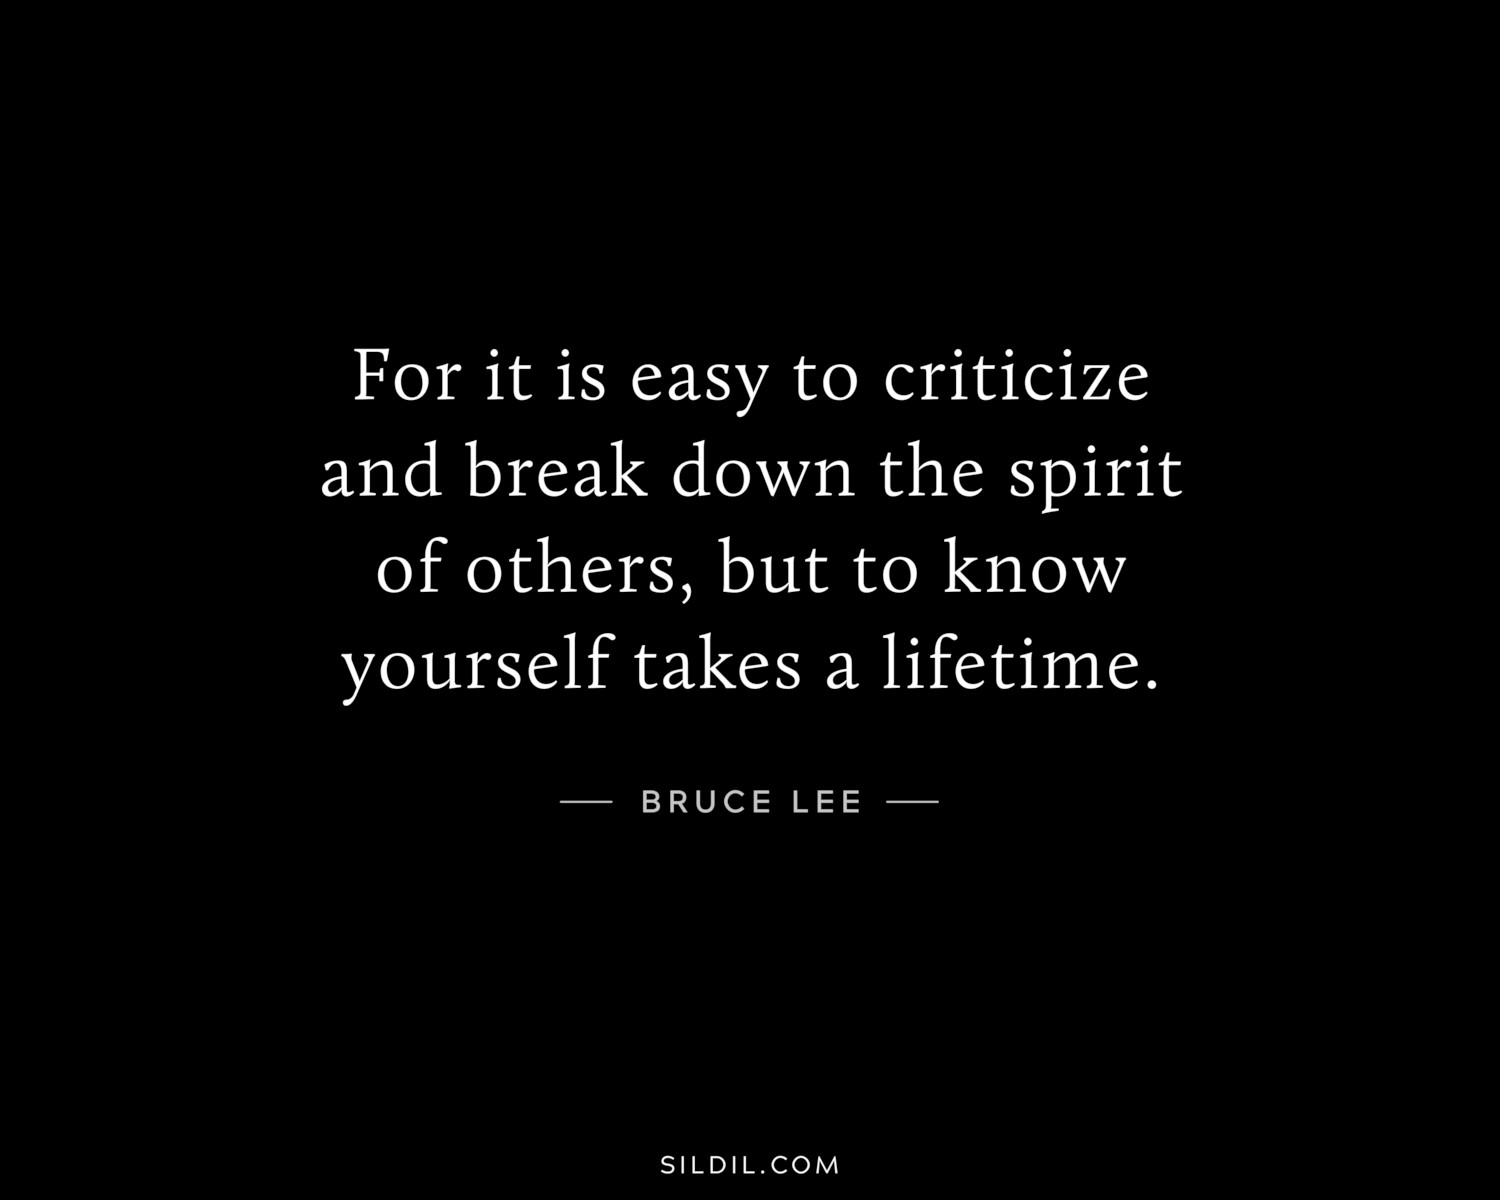 For it is easy to criticize and break down the spirit of others, but to know yourself takes a lifetime.